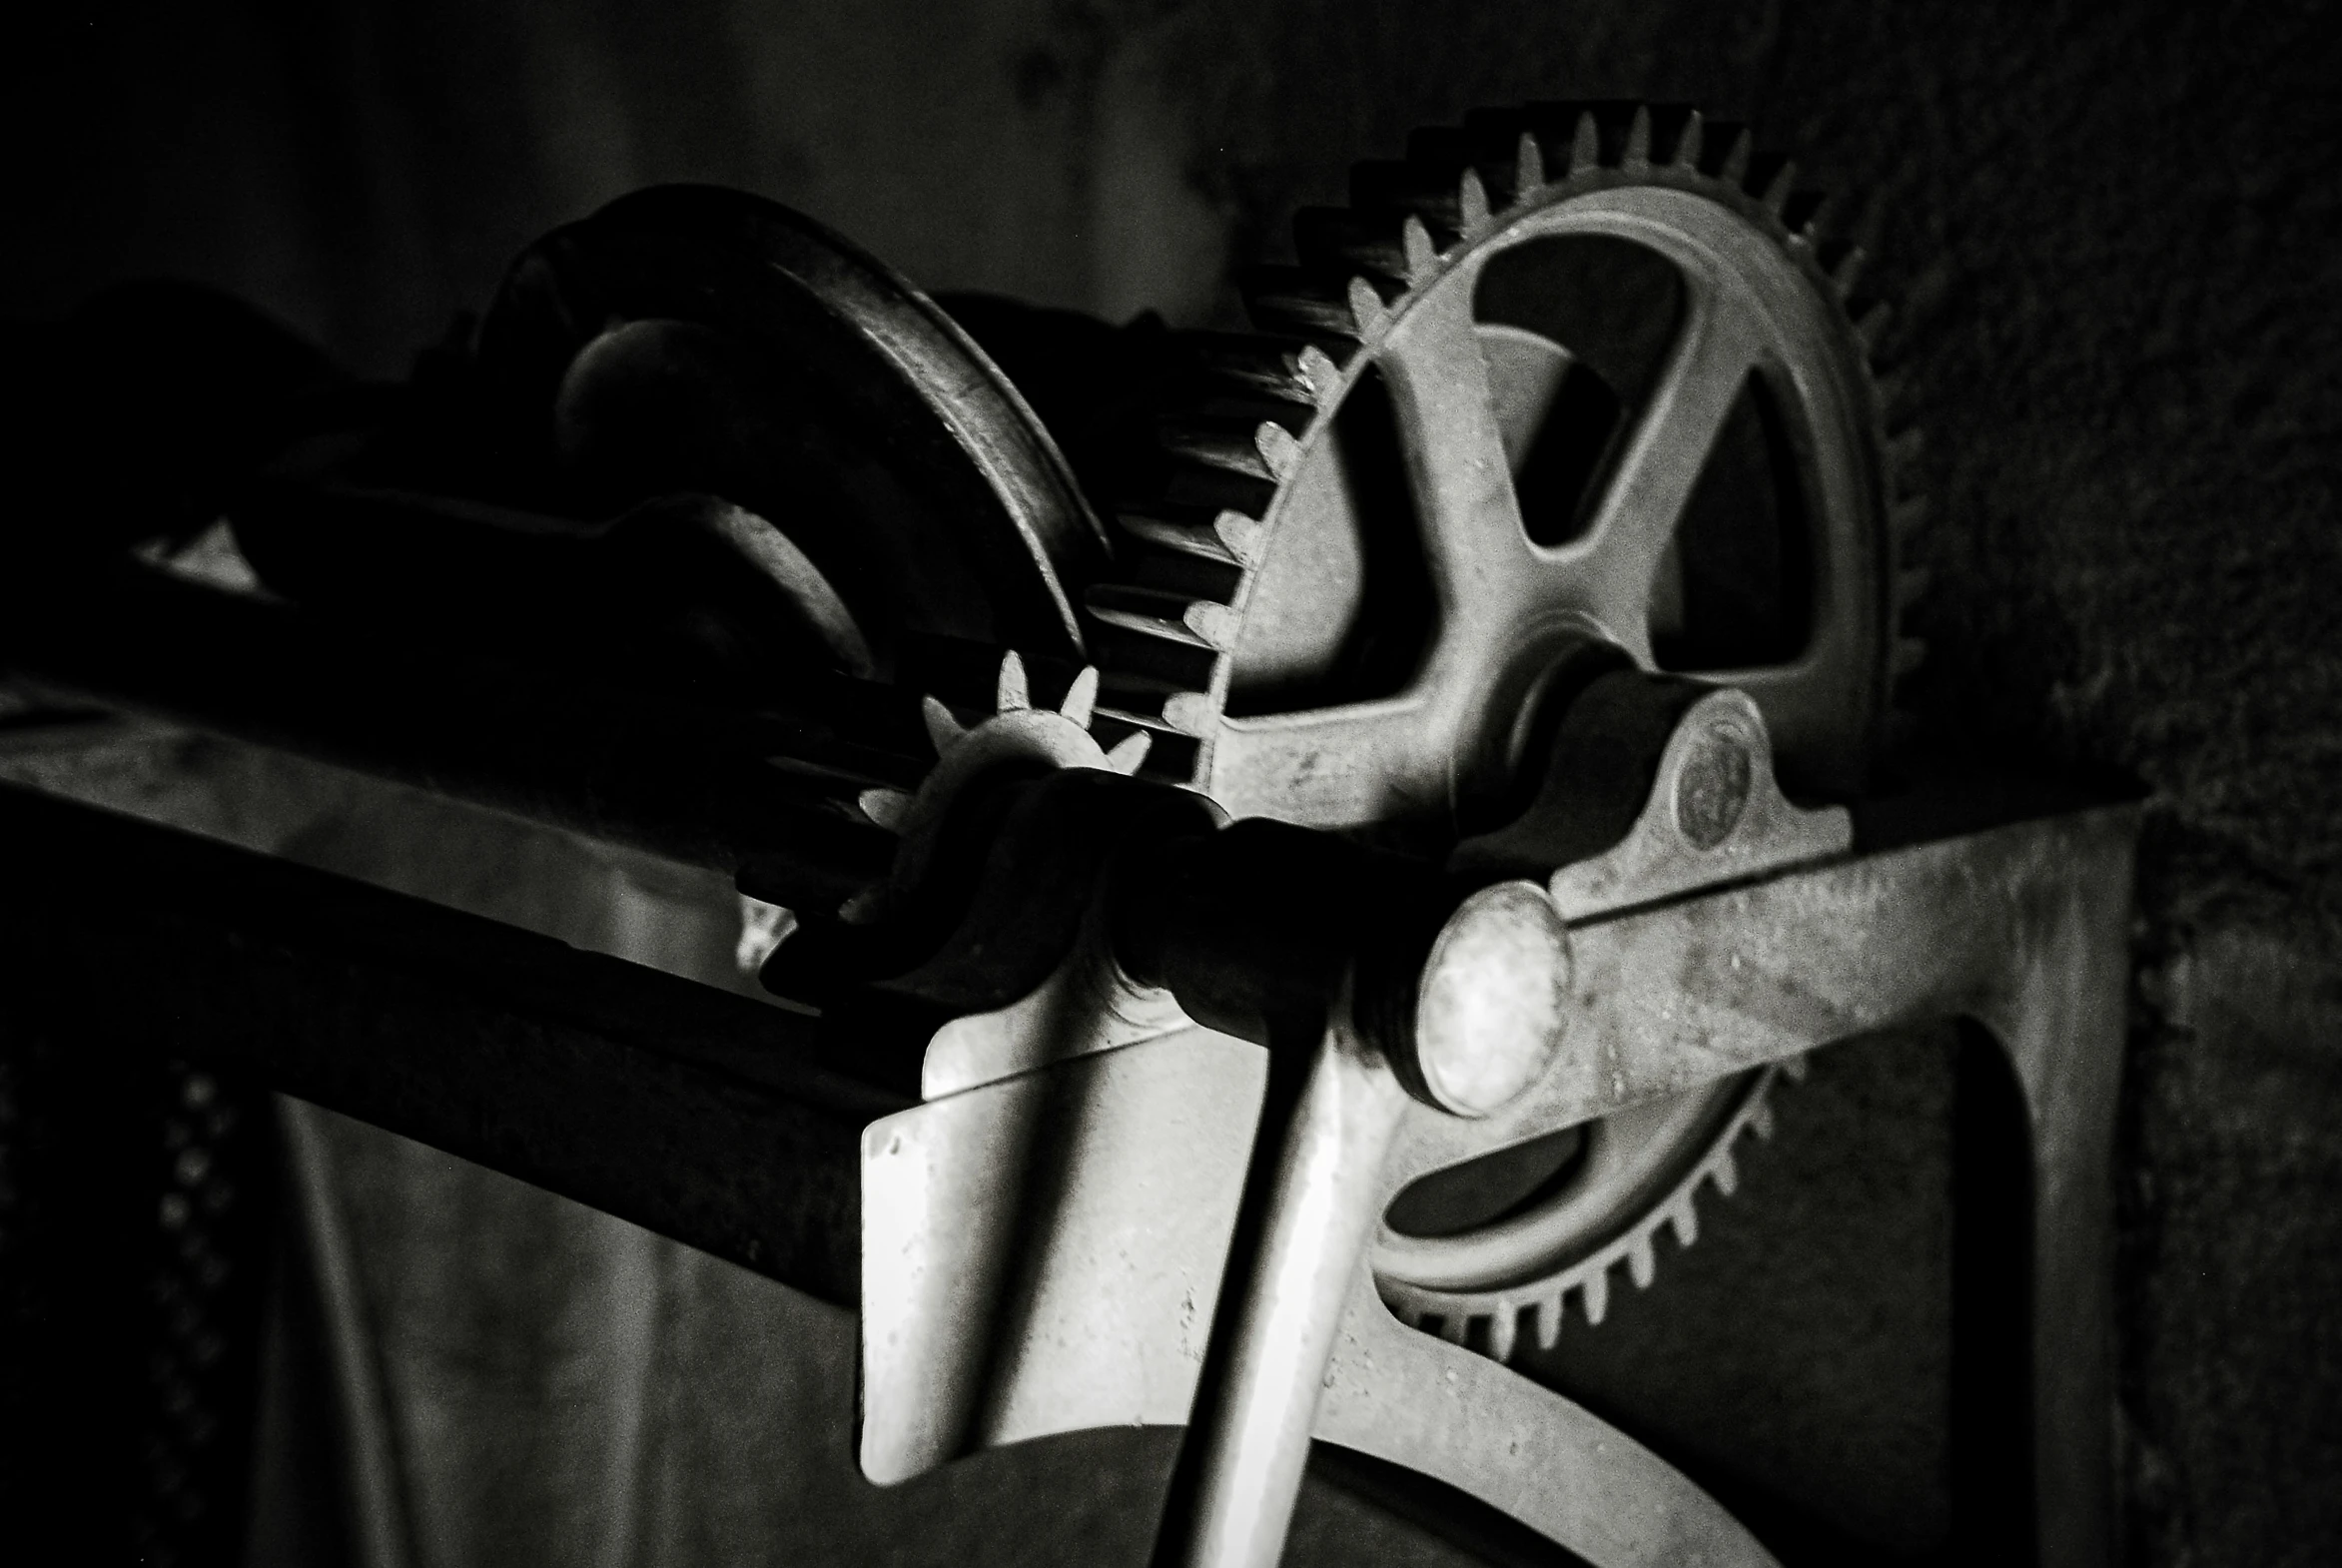 the gears of a machine in black and white